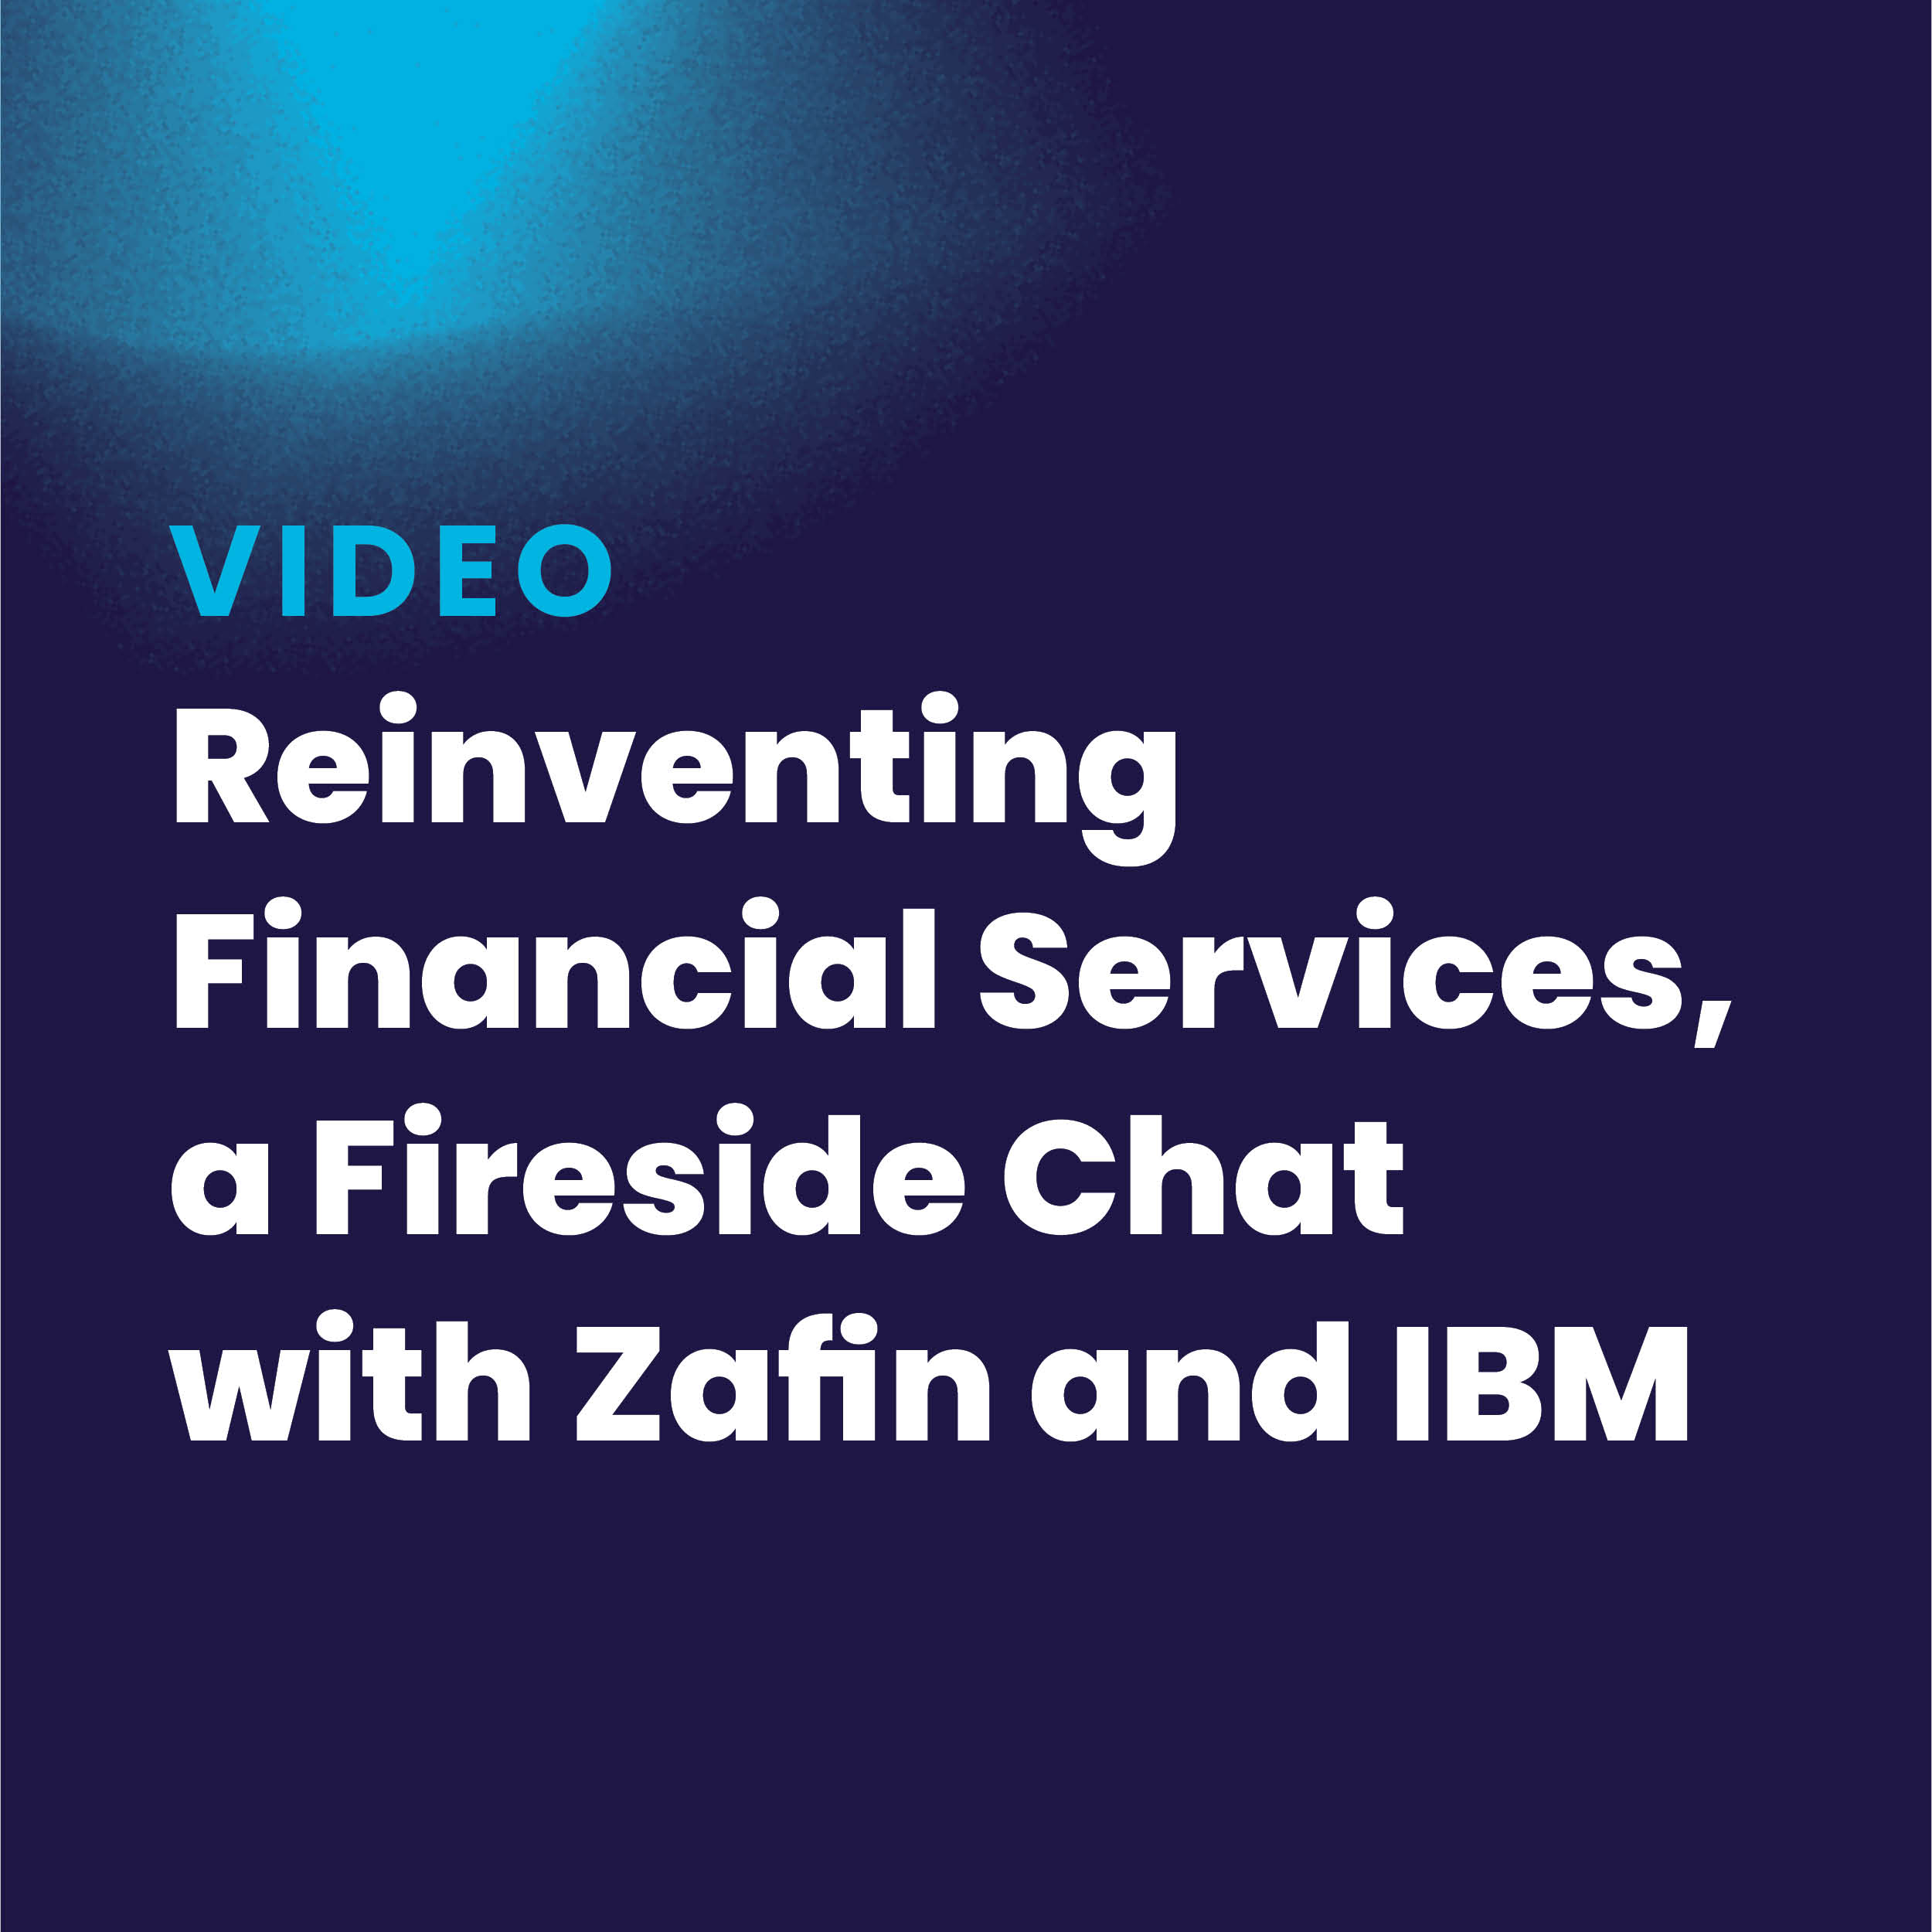 VIDEO | Reinventing Financial Services, a Fireside Chat with Zafin and IBM